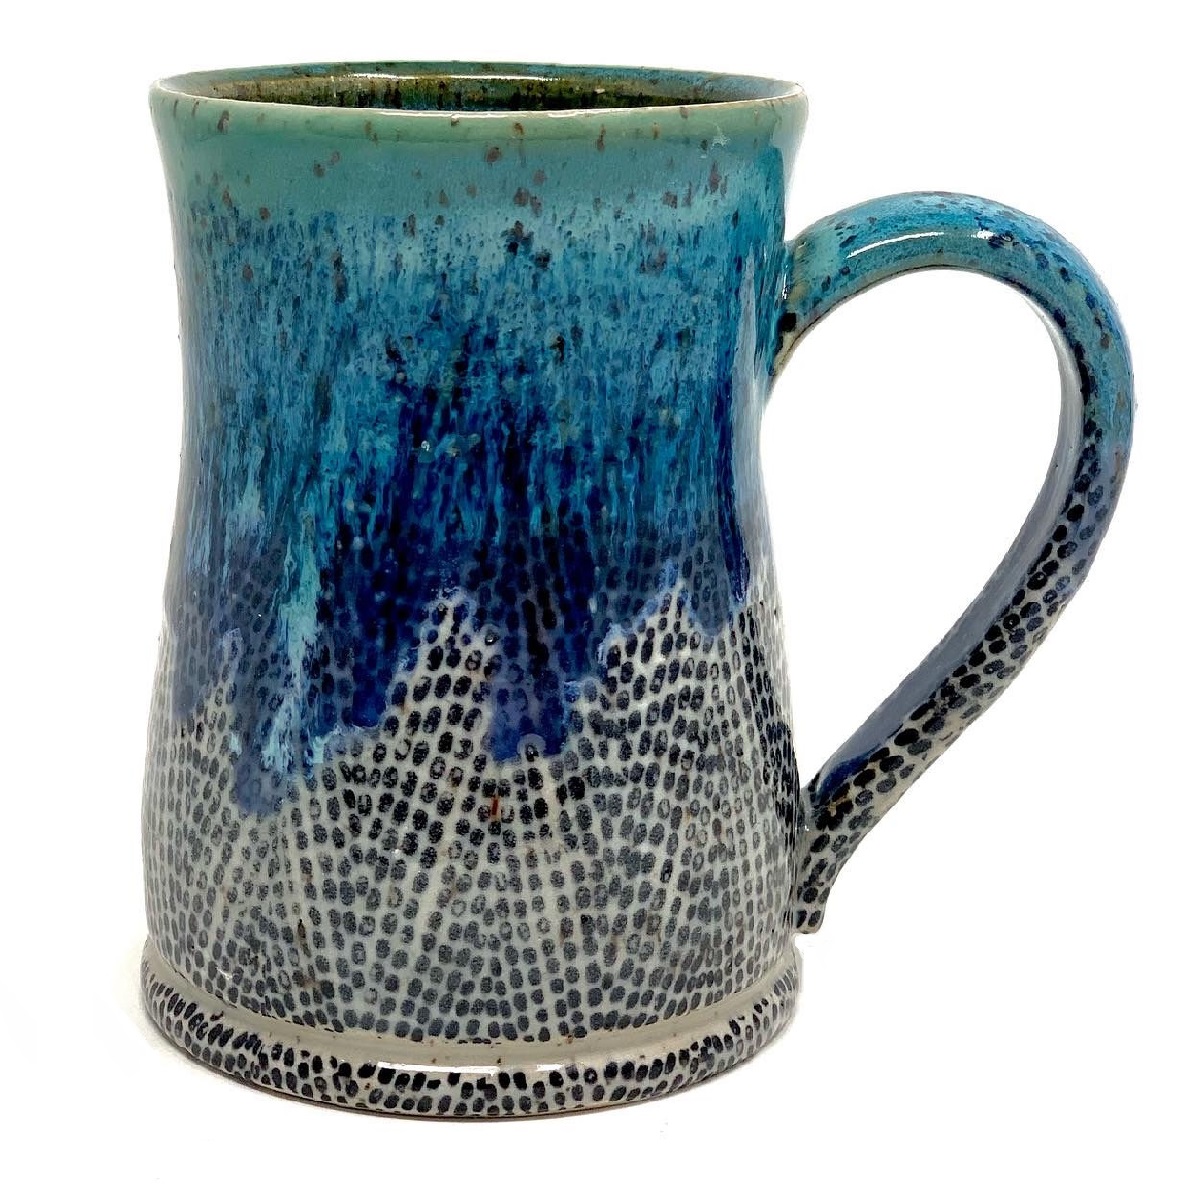 The Indigo Mug offers a robust tactile experience with its dynamic blue glaze that flows like an Appalachian waterfall over a pebbled riverbed.